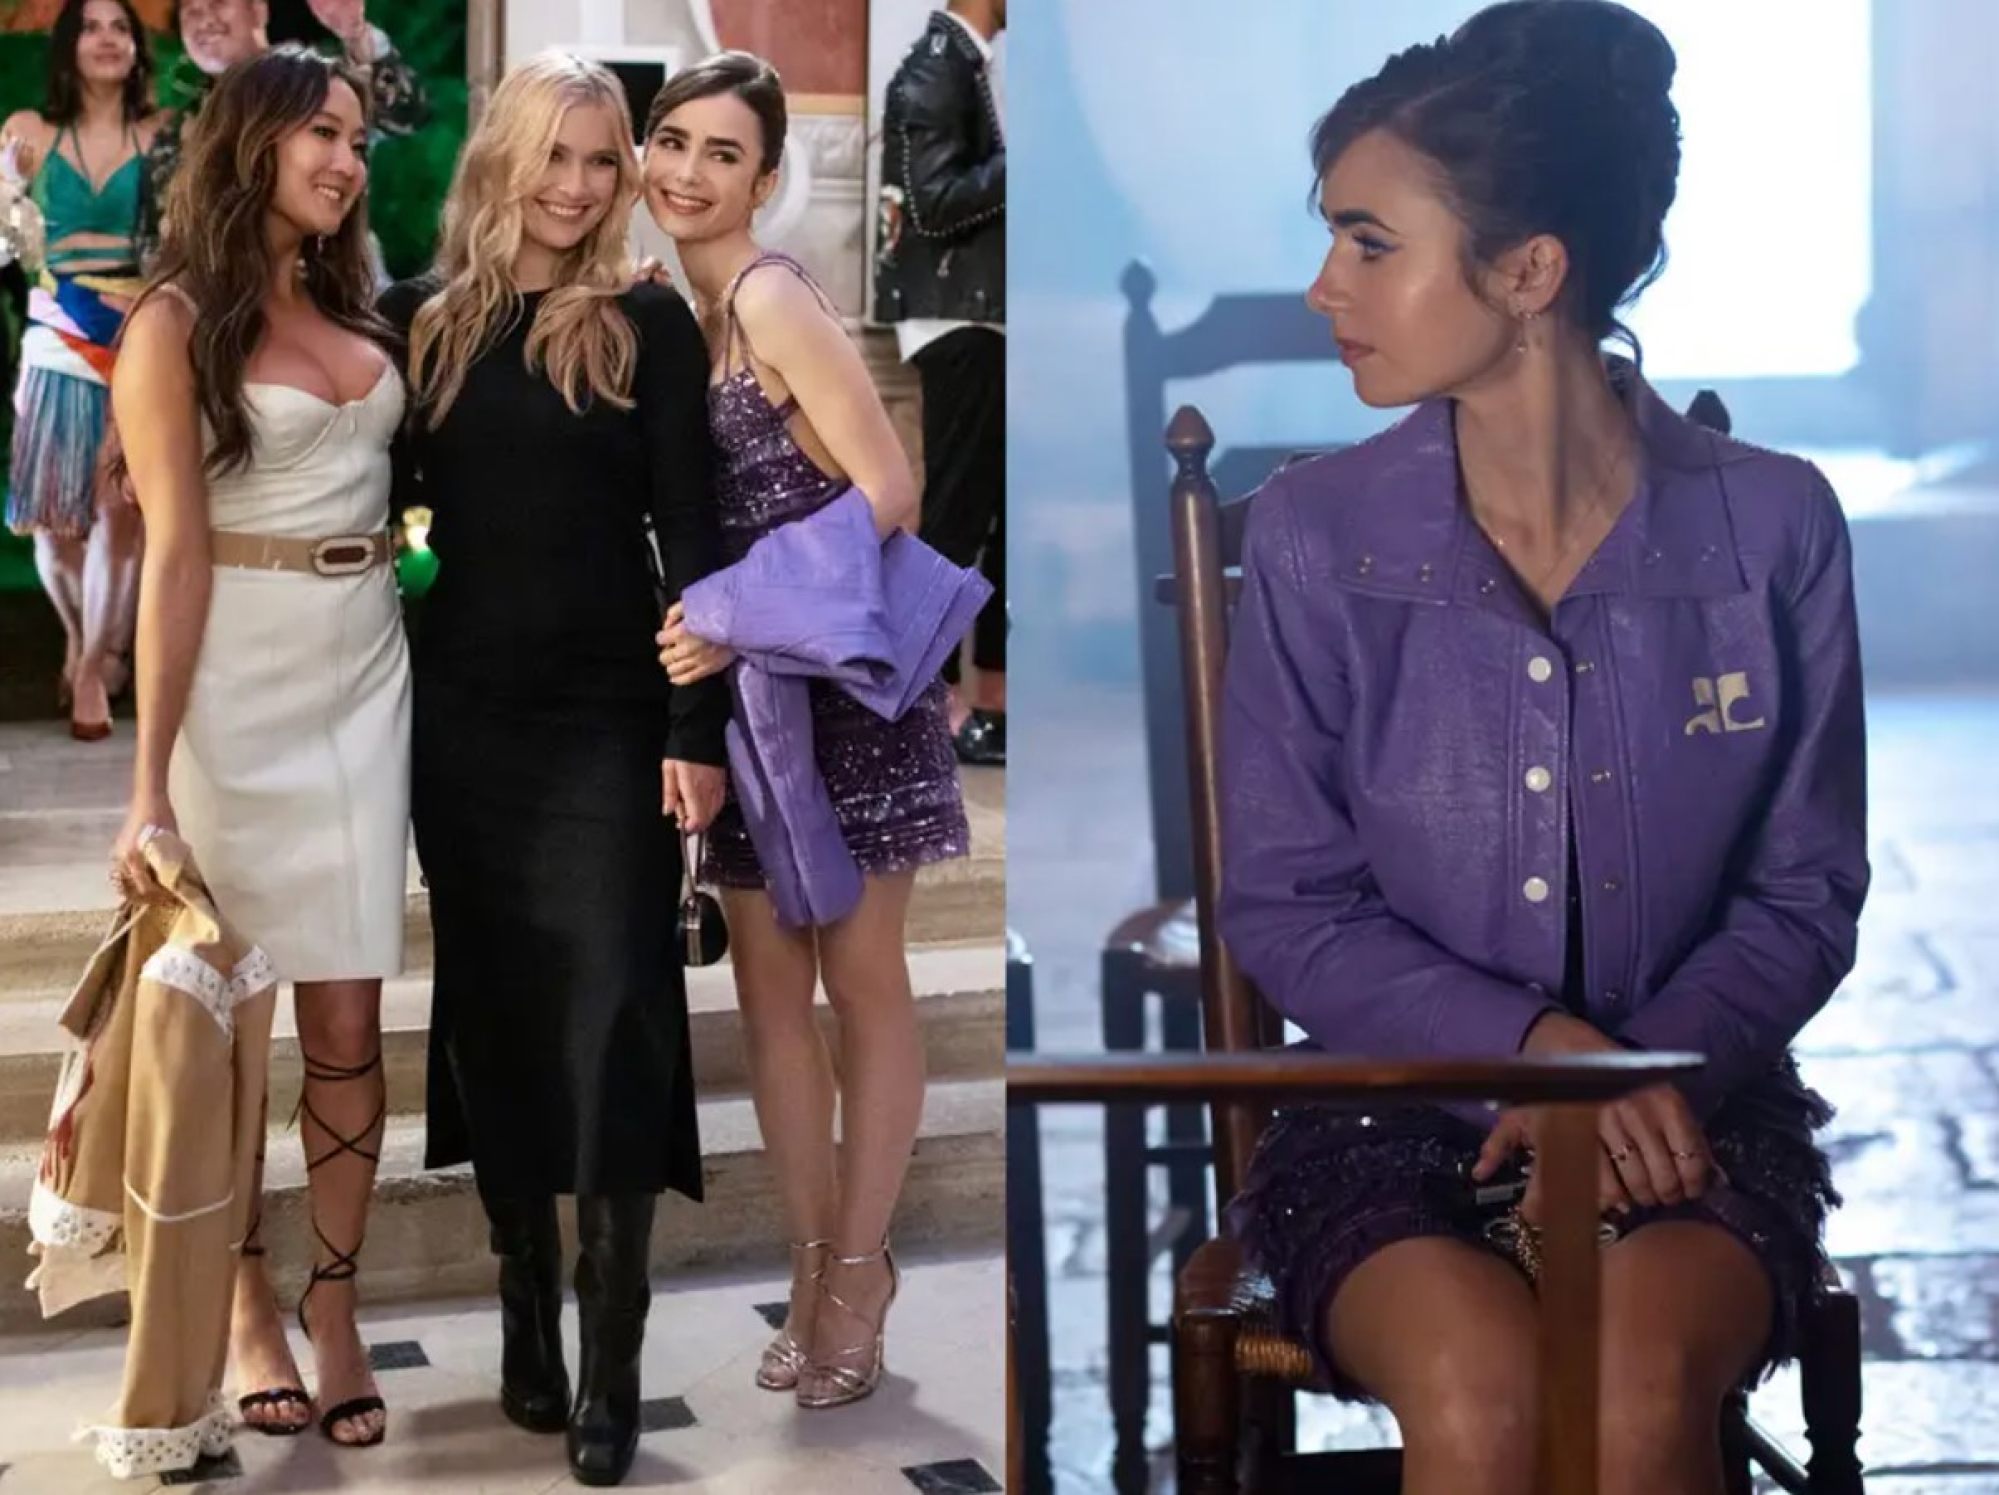 Emily in Paris' Season 2 Outfits: Shop Her Style Here – StyleCaster